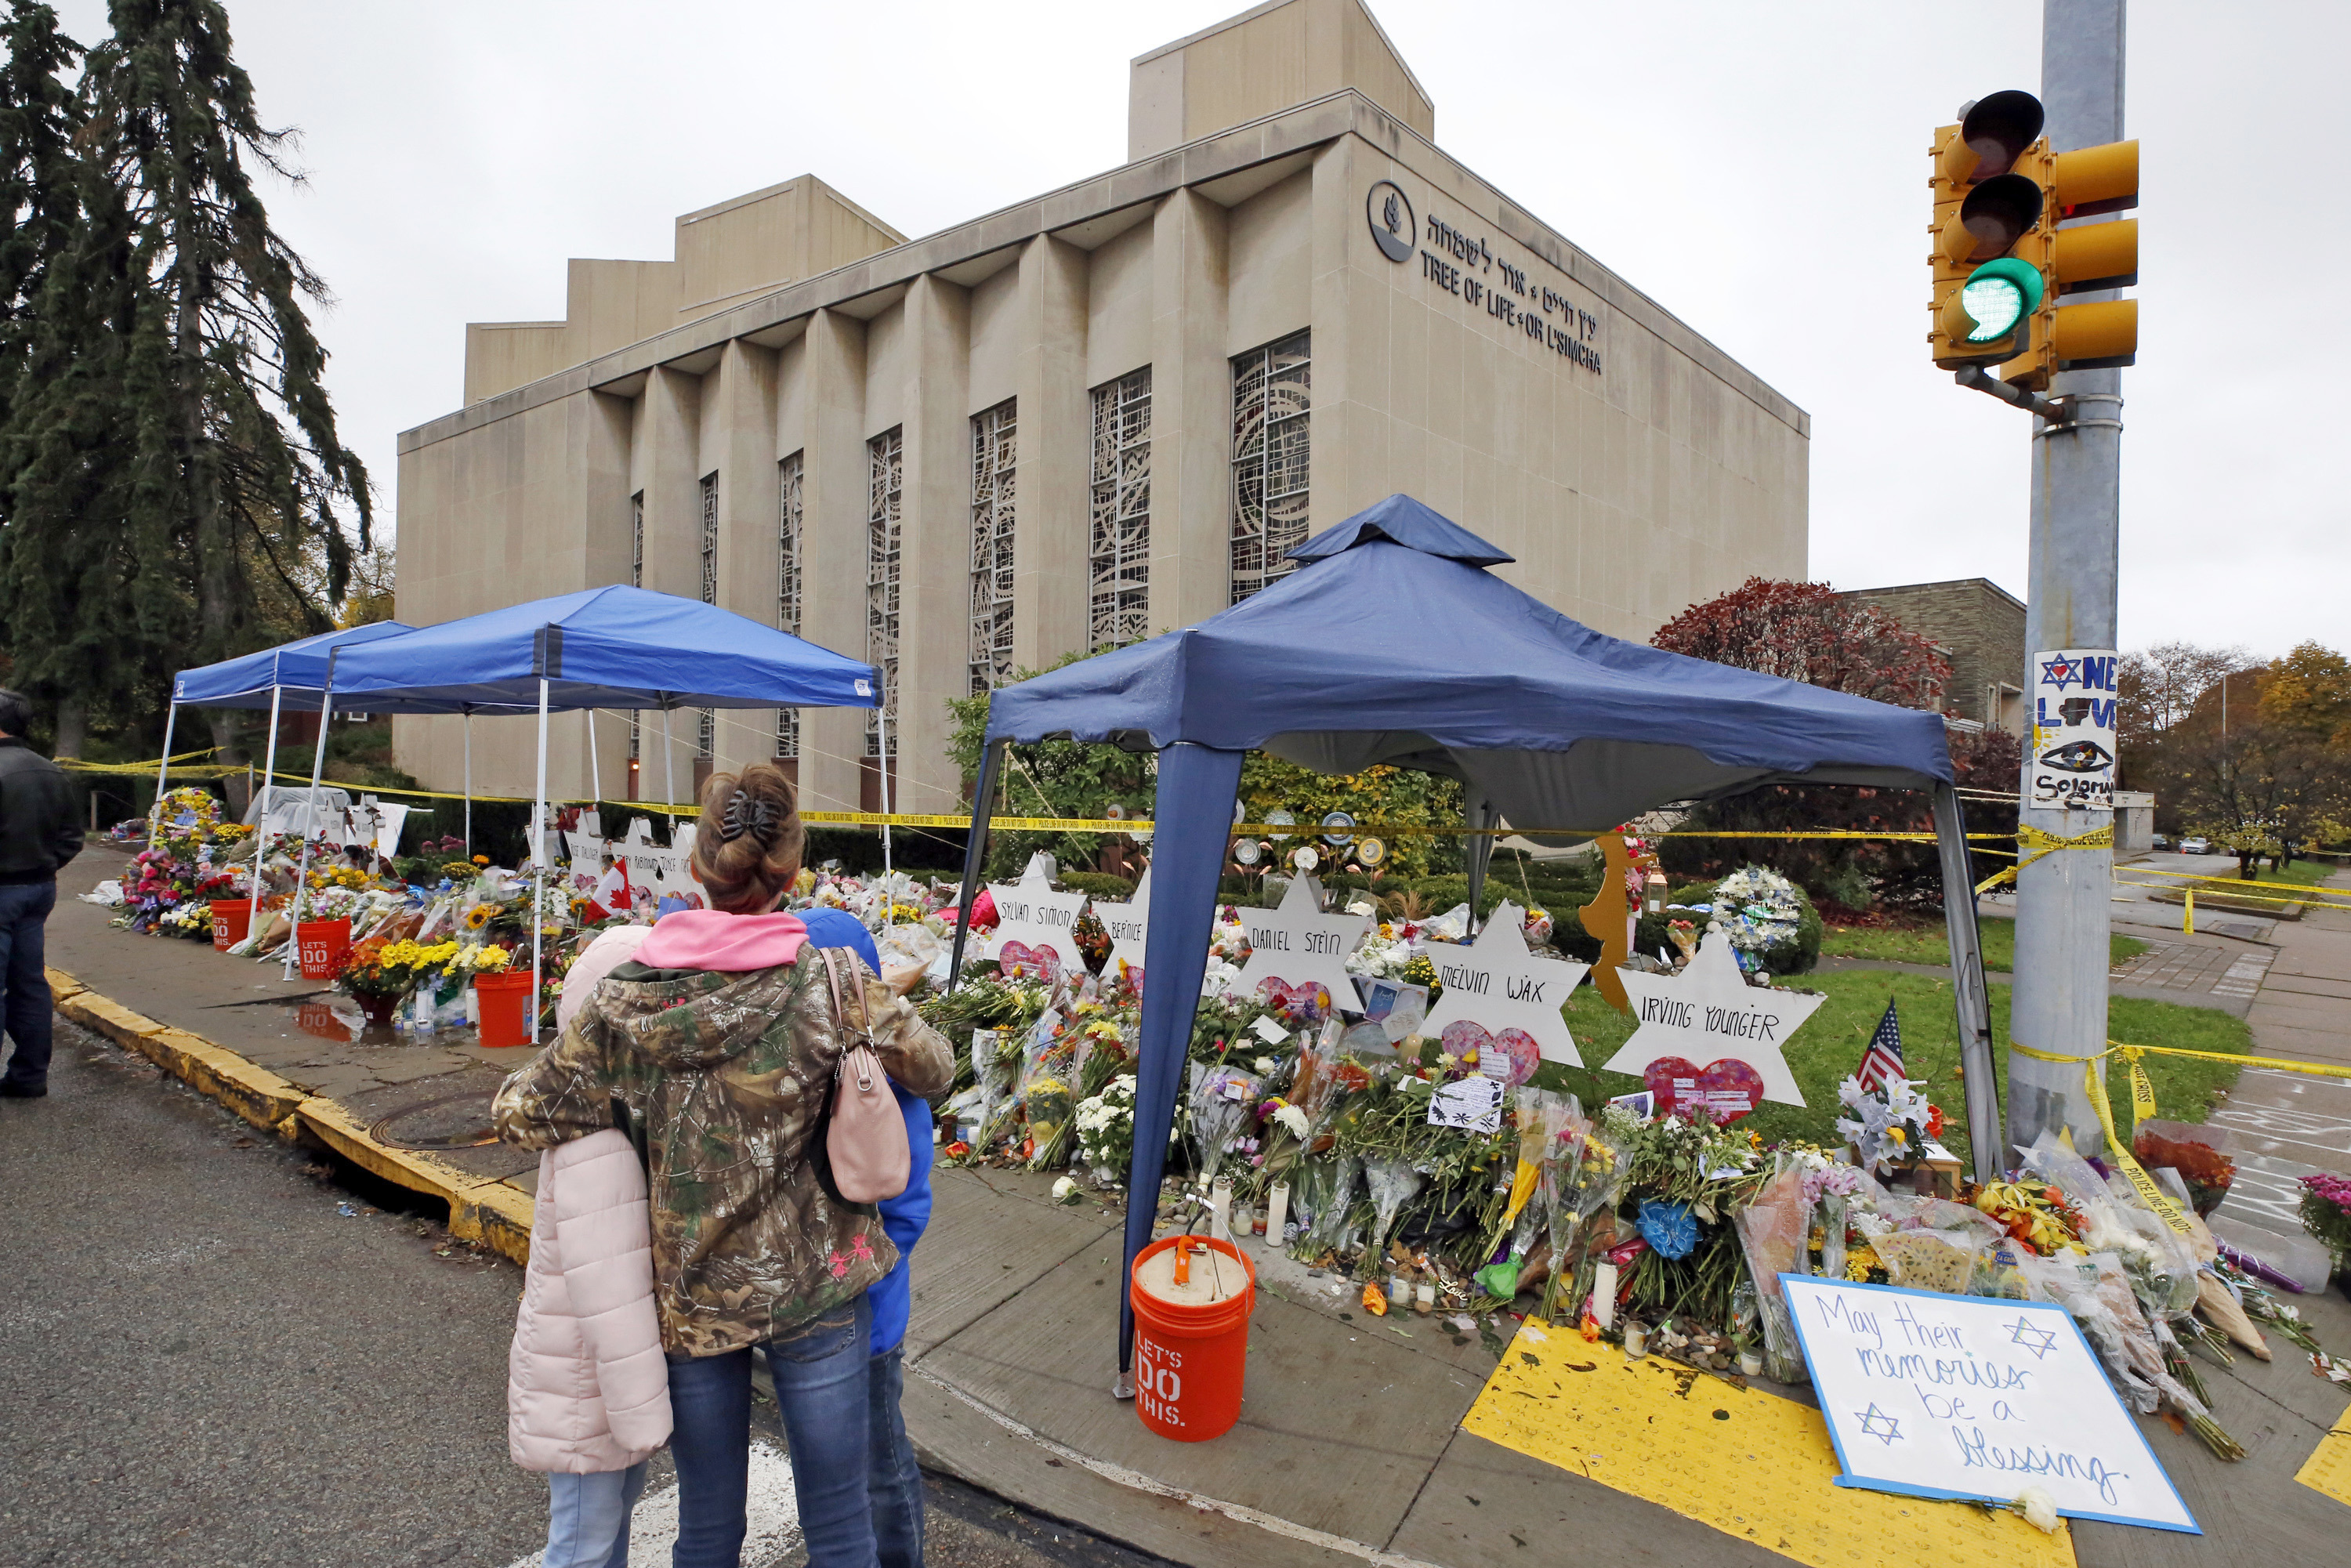 A woman and her children pause Nov. 3, 2018, to take in a makeshift memorial outside the Tree of Life synagogue honoring the 11 people killed Oct. 27, 2018, while worshipping in the Squirrel Hill neighborhood of Pittsburgh. (AP Photo/Gene J. Puskar)